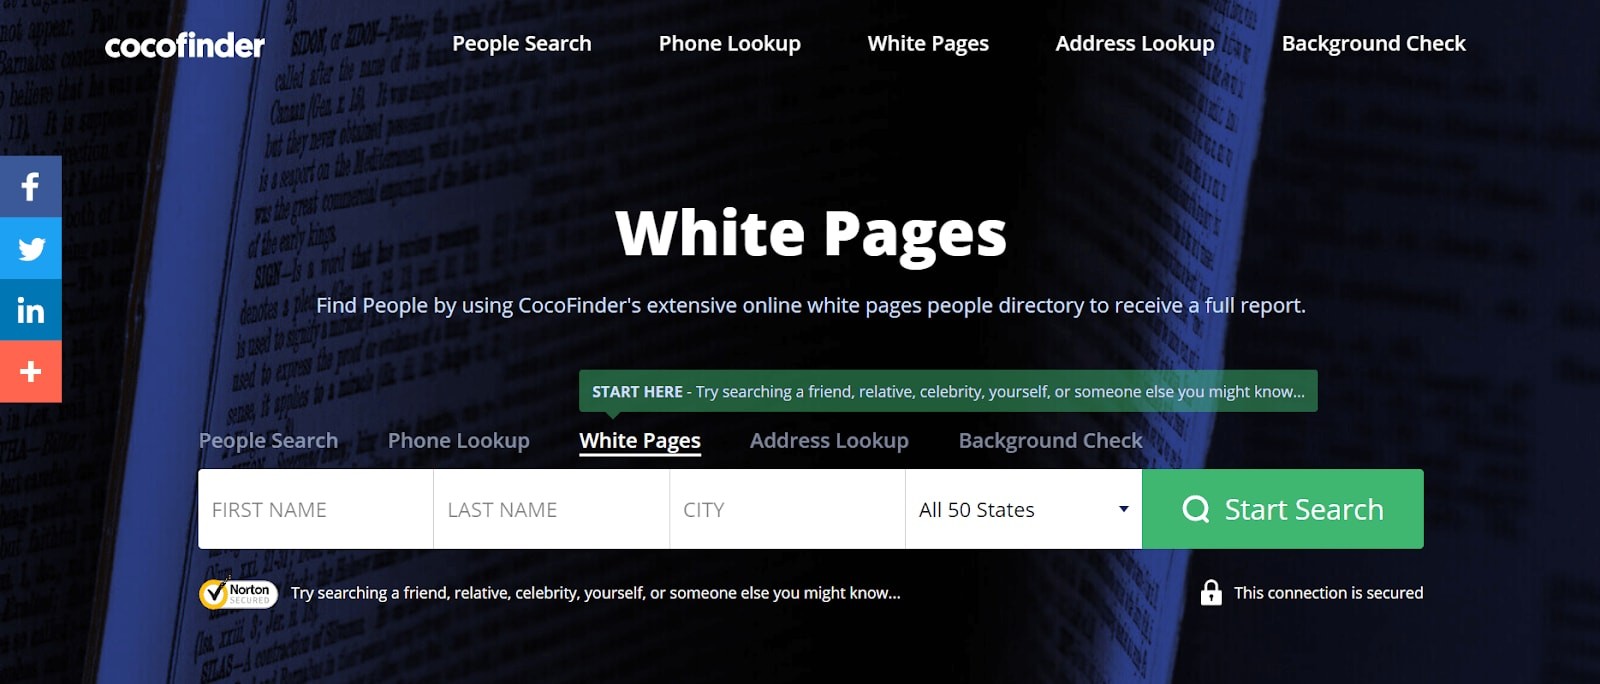 How to Get White Pages